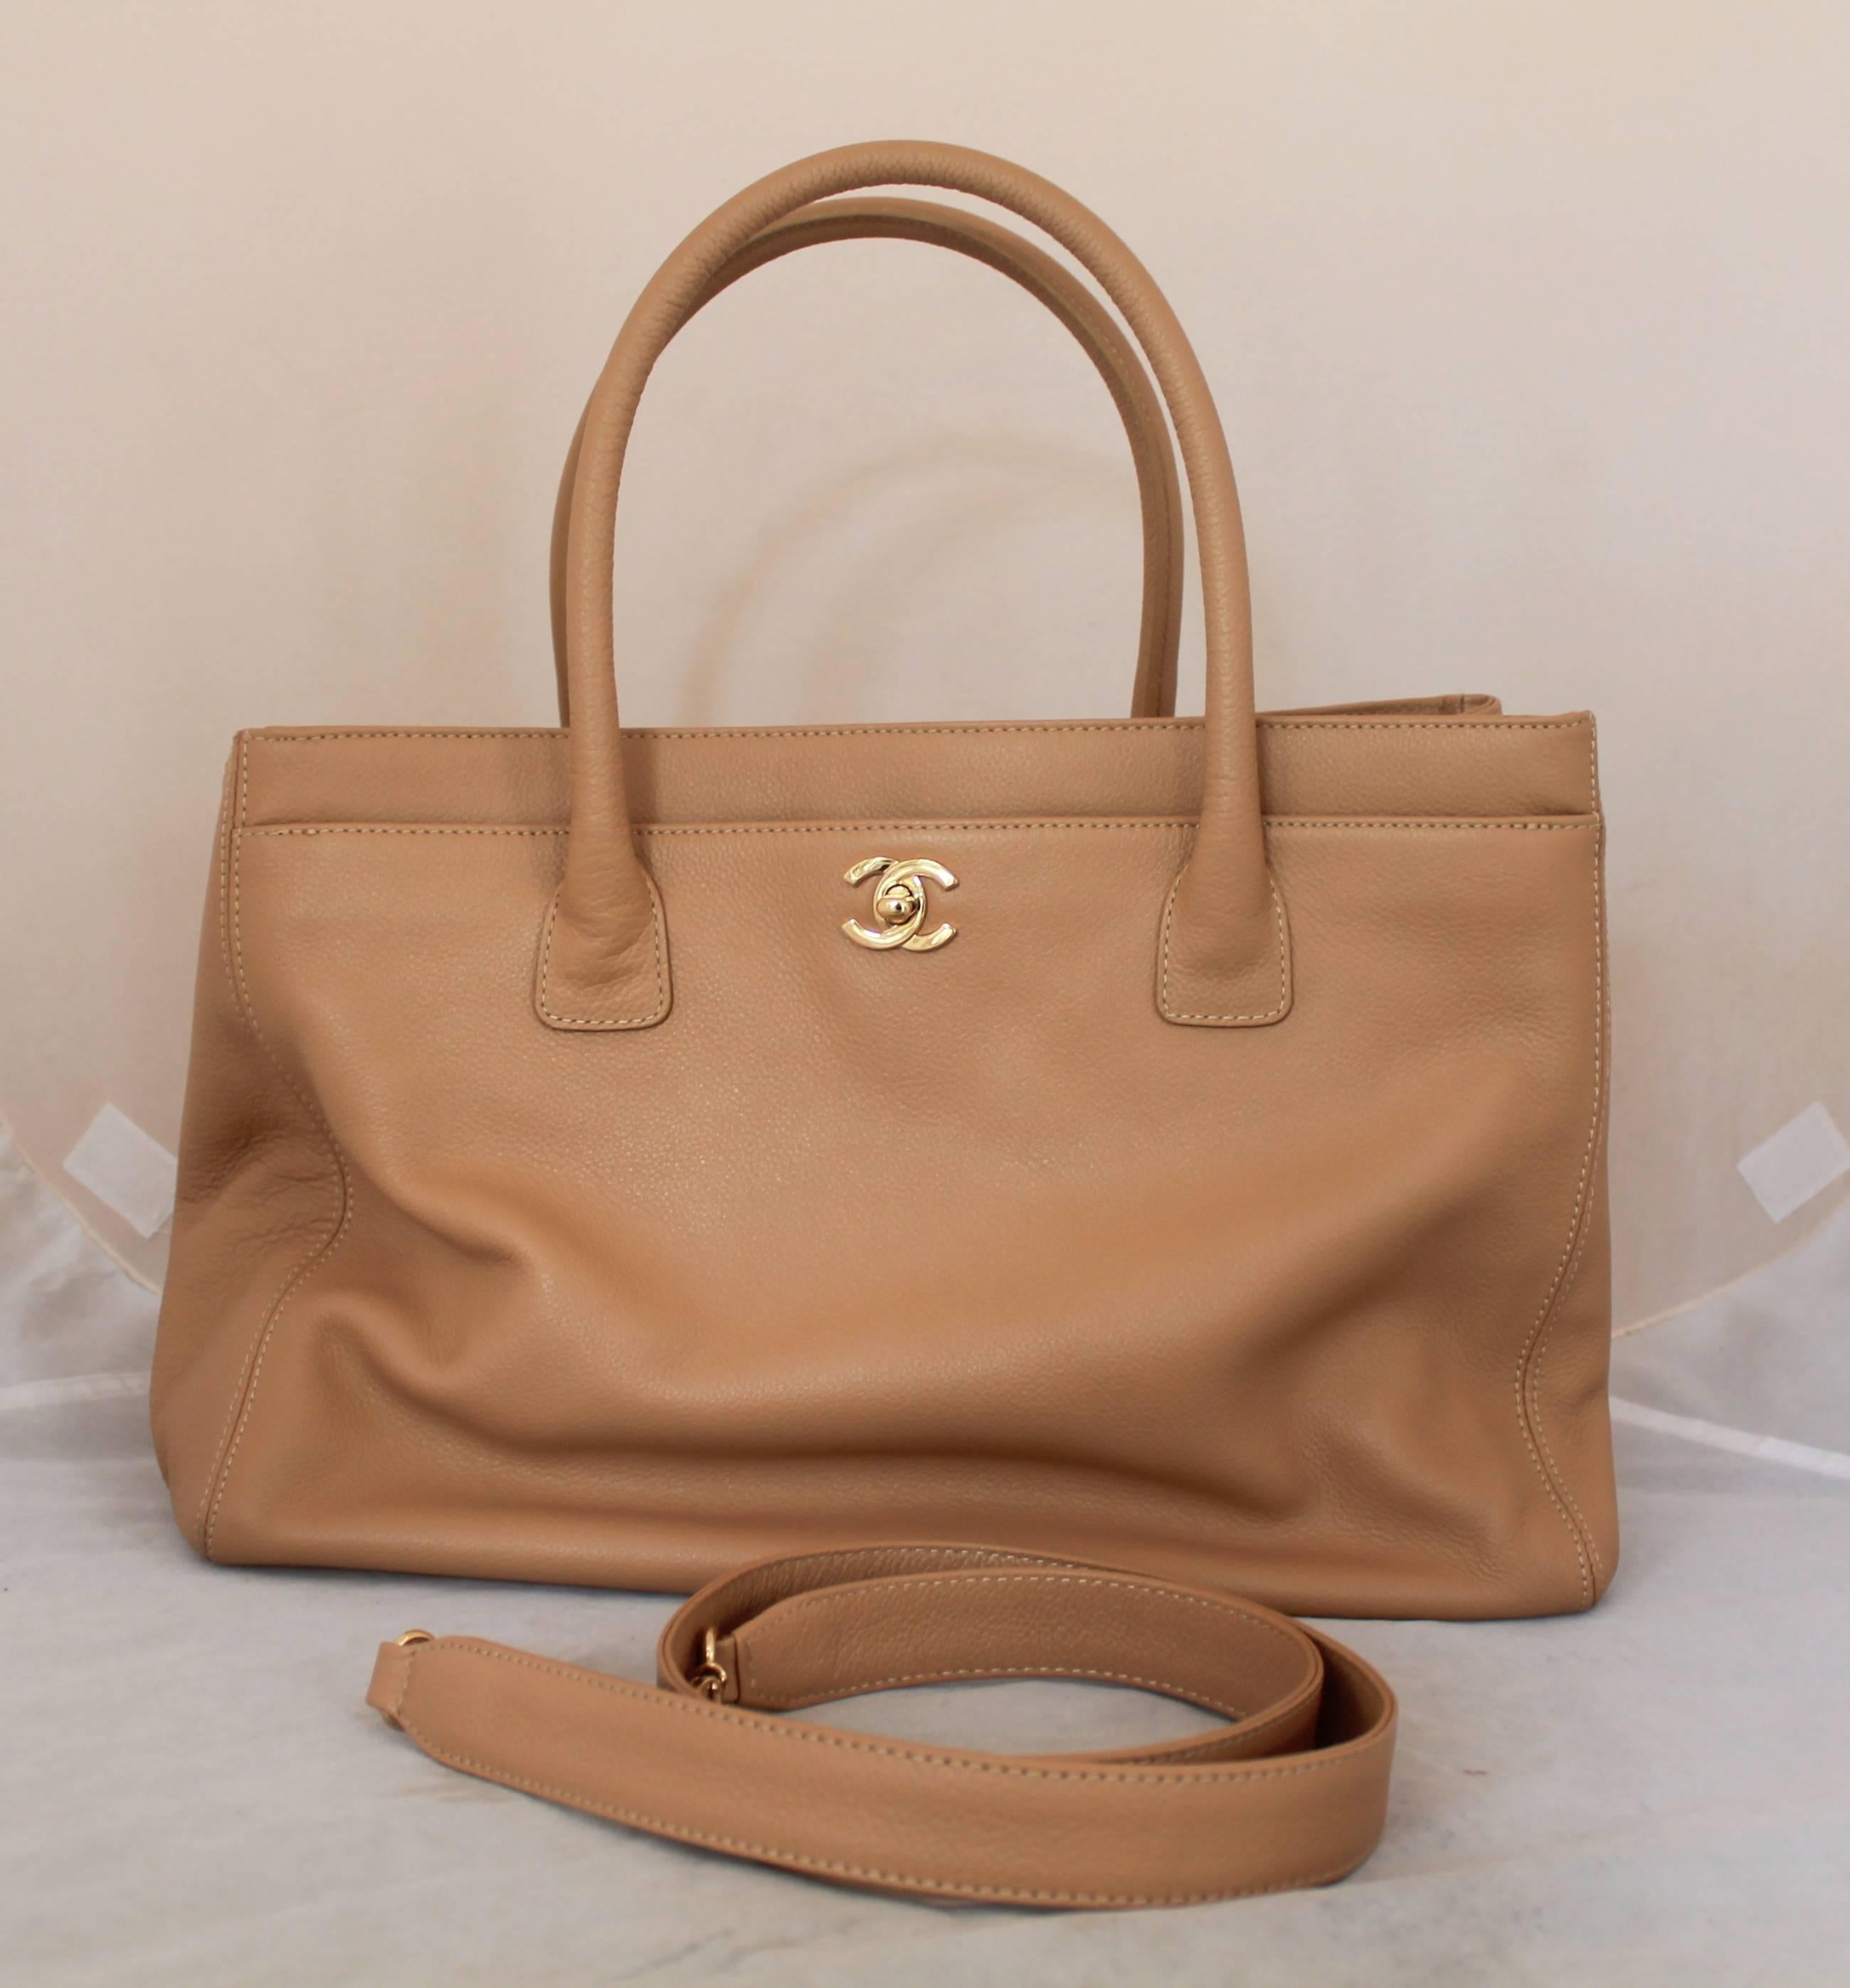 Chanel Nude Caviar Leather Cerf Tote - GHW - 2004. This beautiful tote has two top handles and three different sections. The first section closes with a gold turnkey lock and has a gold Chanel logo on the front. The middle section closes with 2